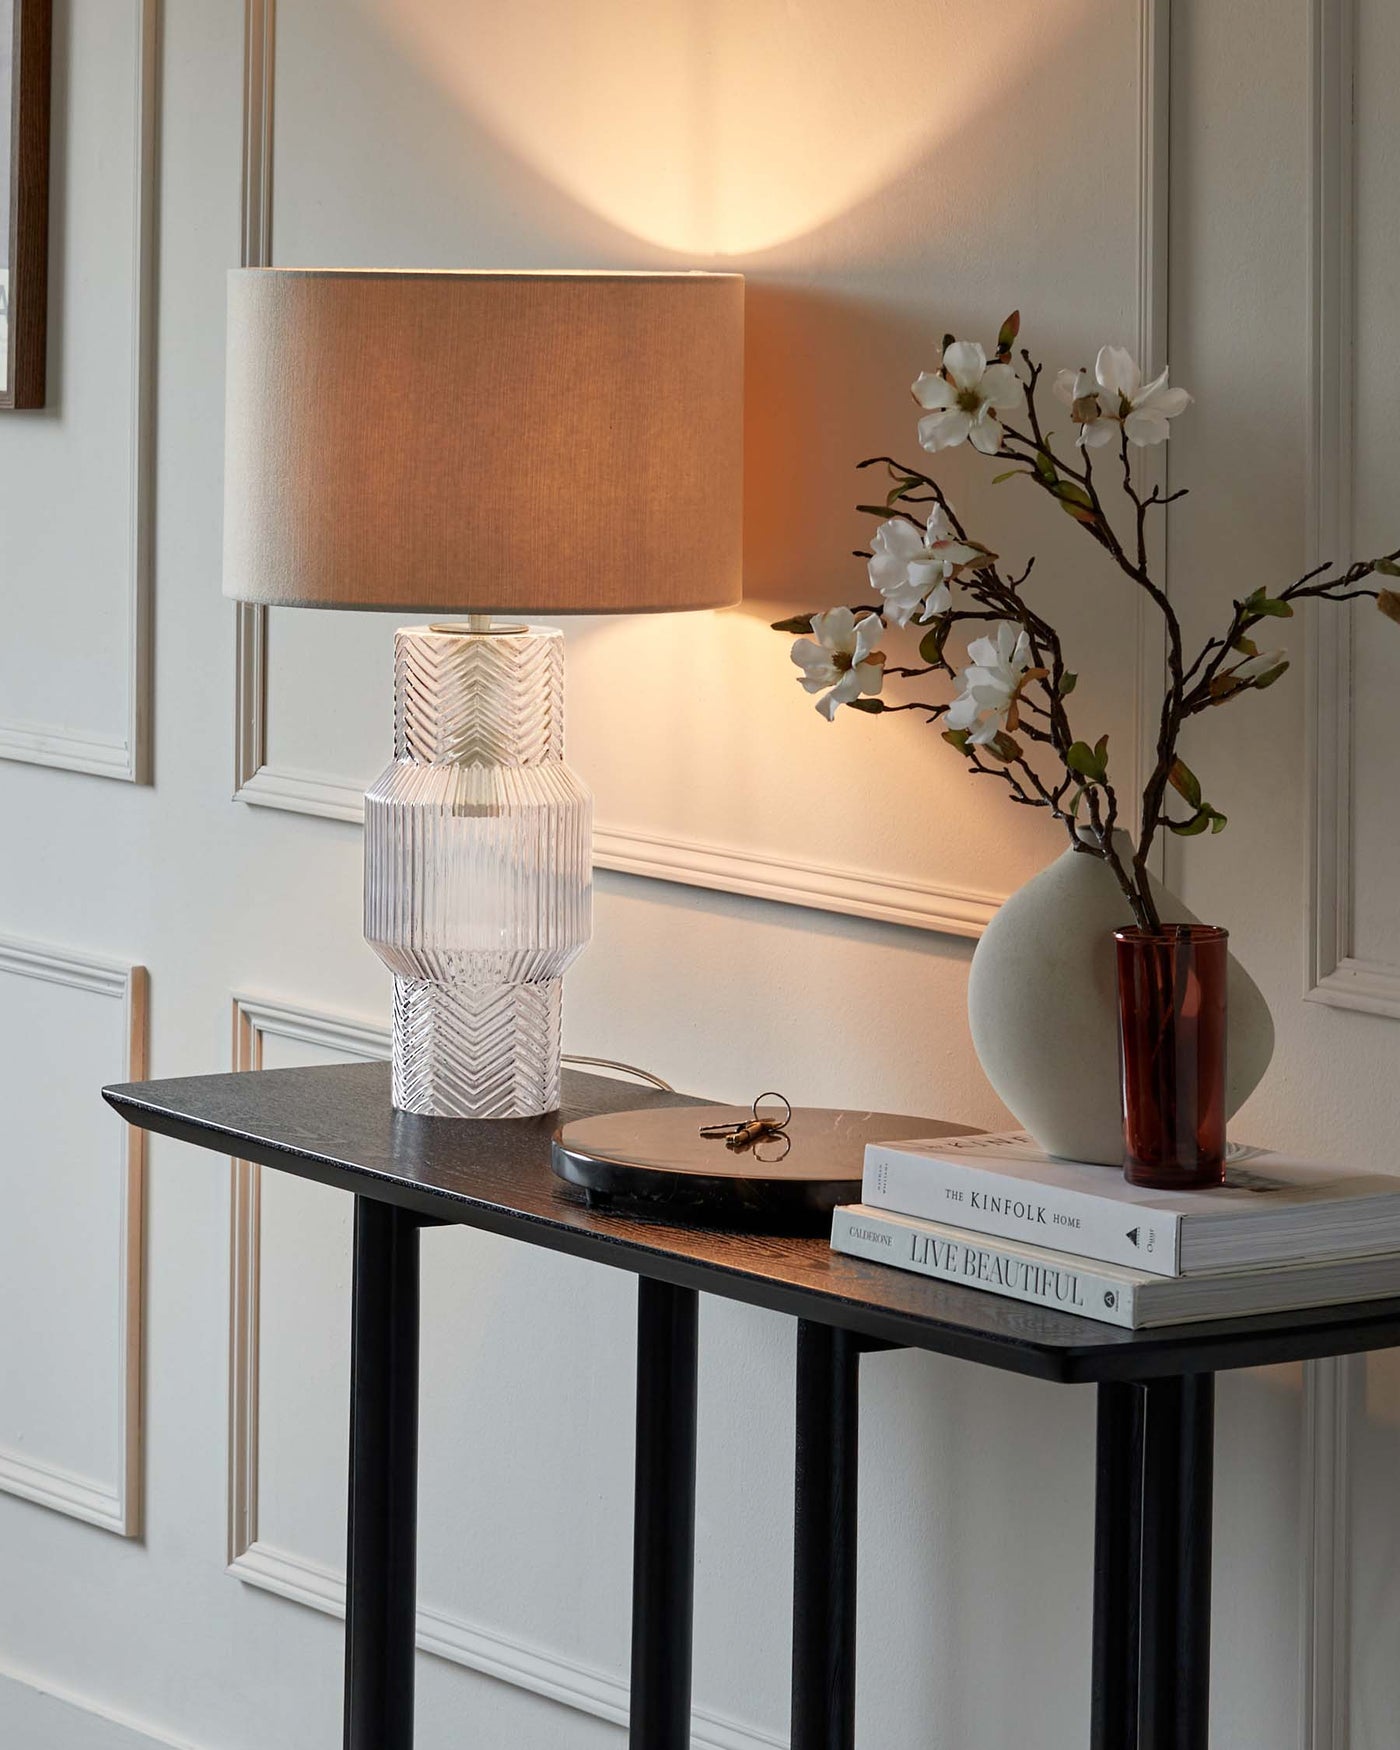 Elegant console table with a dark finish and straight legs, topped with a textured table lamp, a vase with white blossoms, and a stack of decorative books.